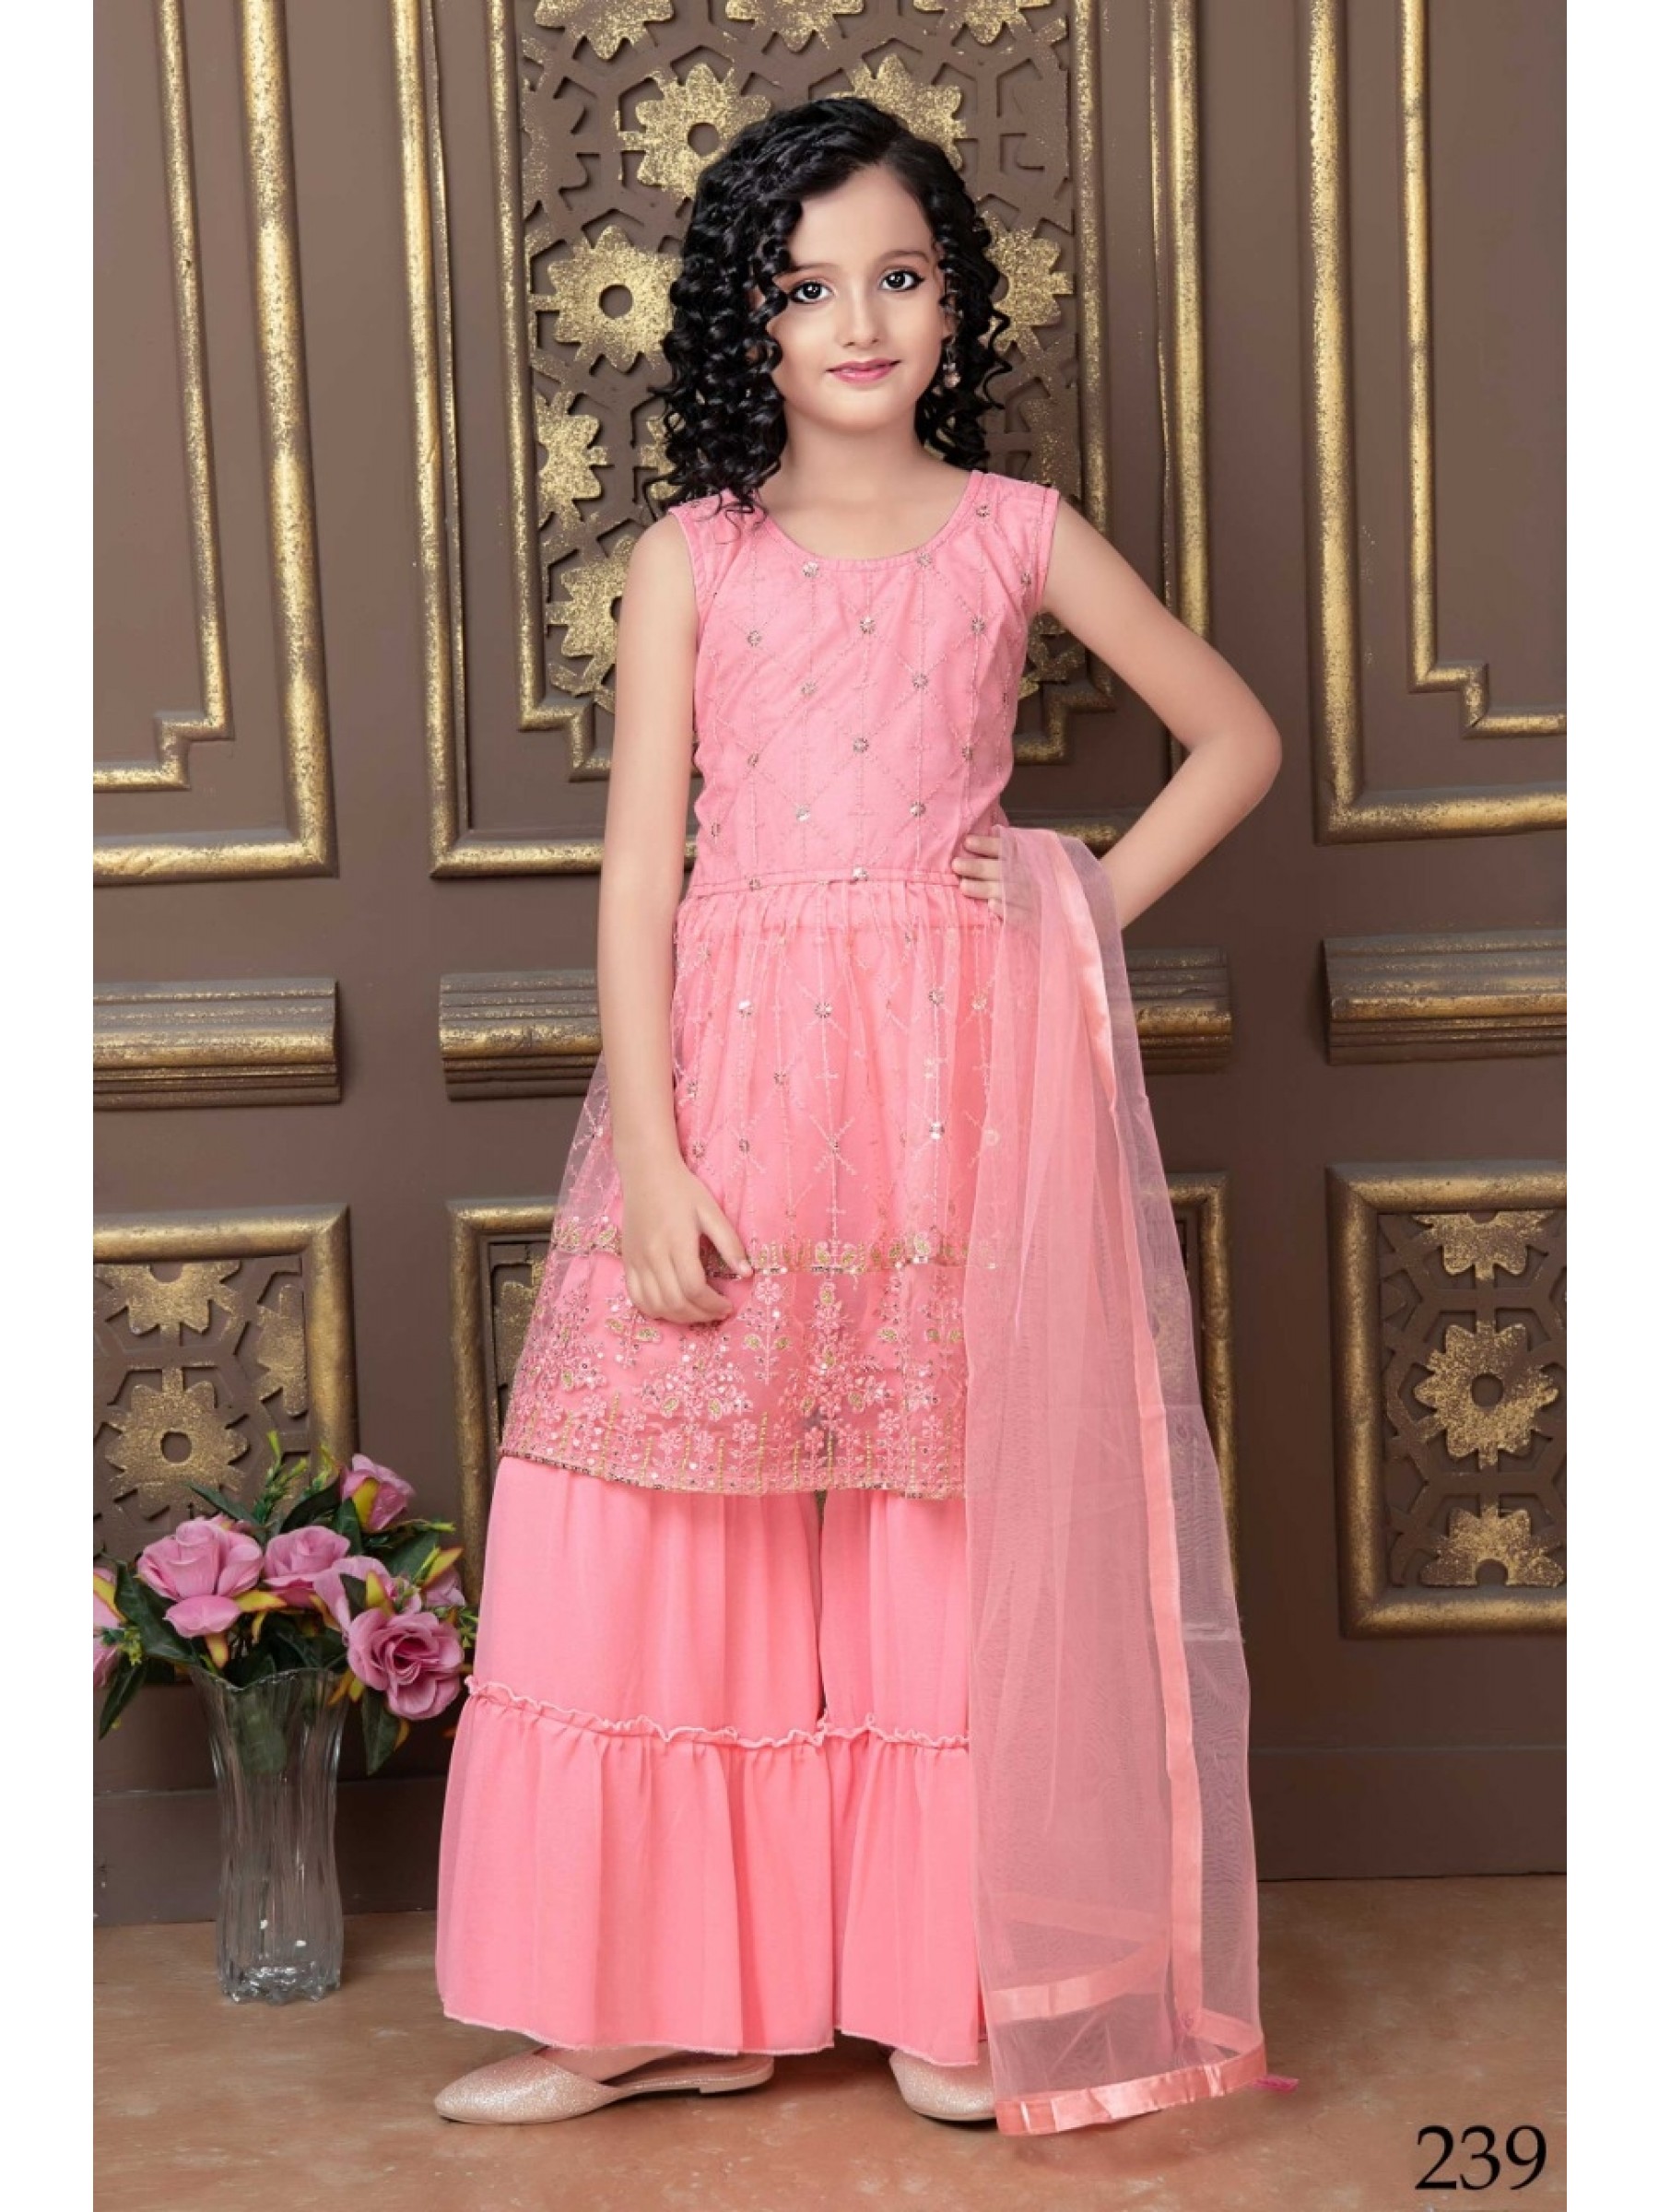 Soft Premium Net  Party Wear Kids Sharara In Pink With Embroidery Work 